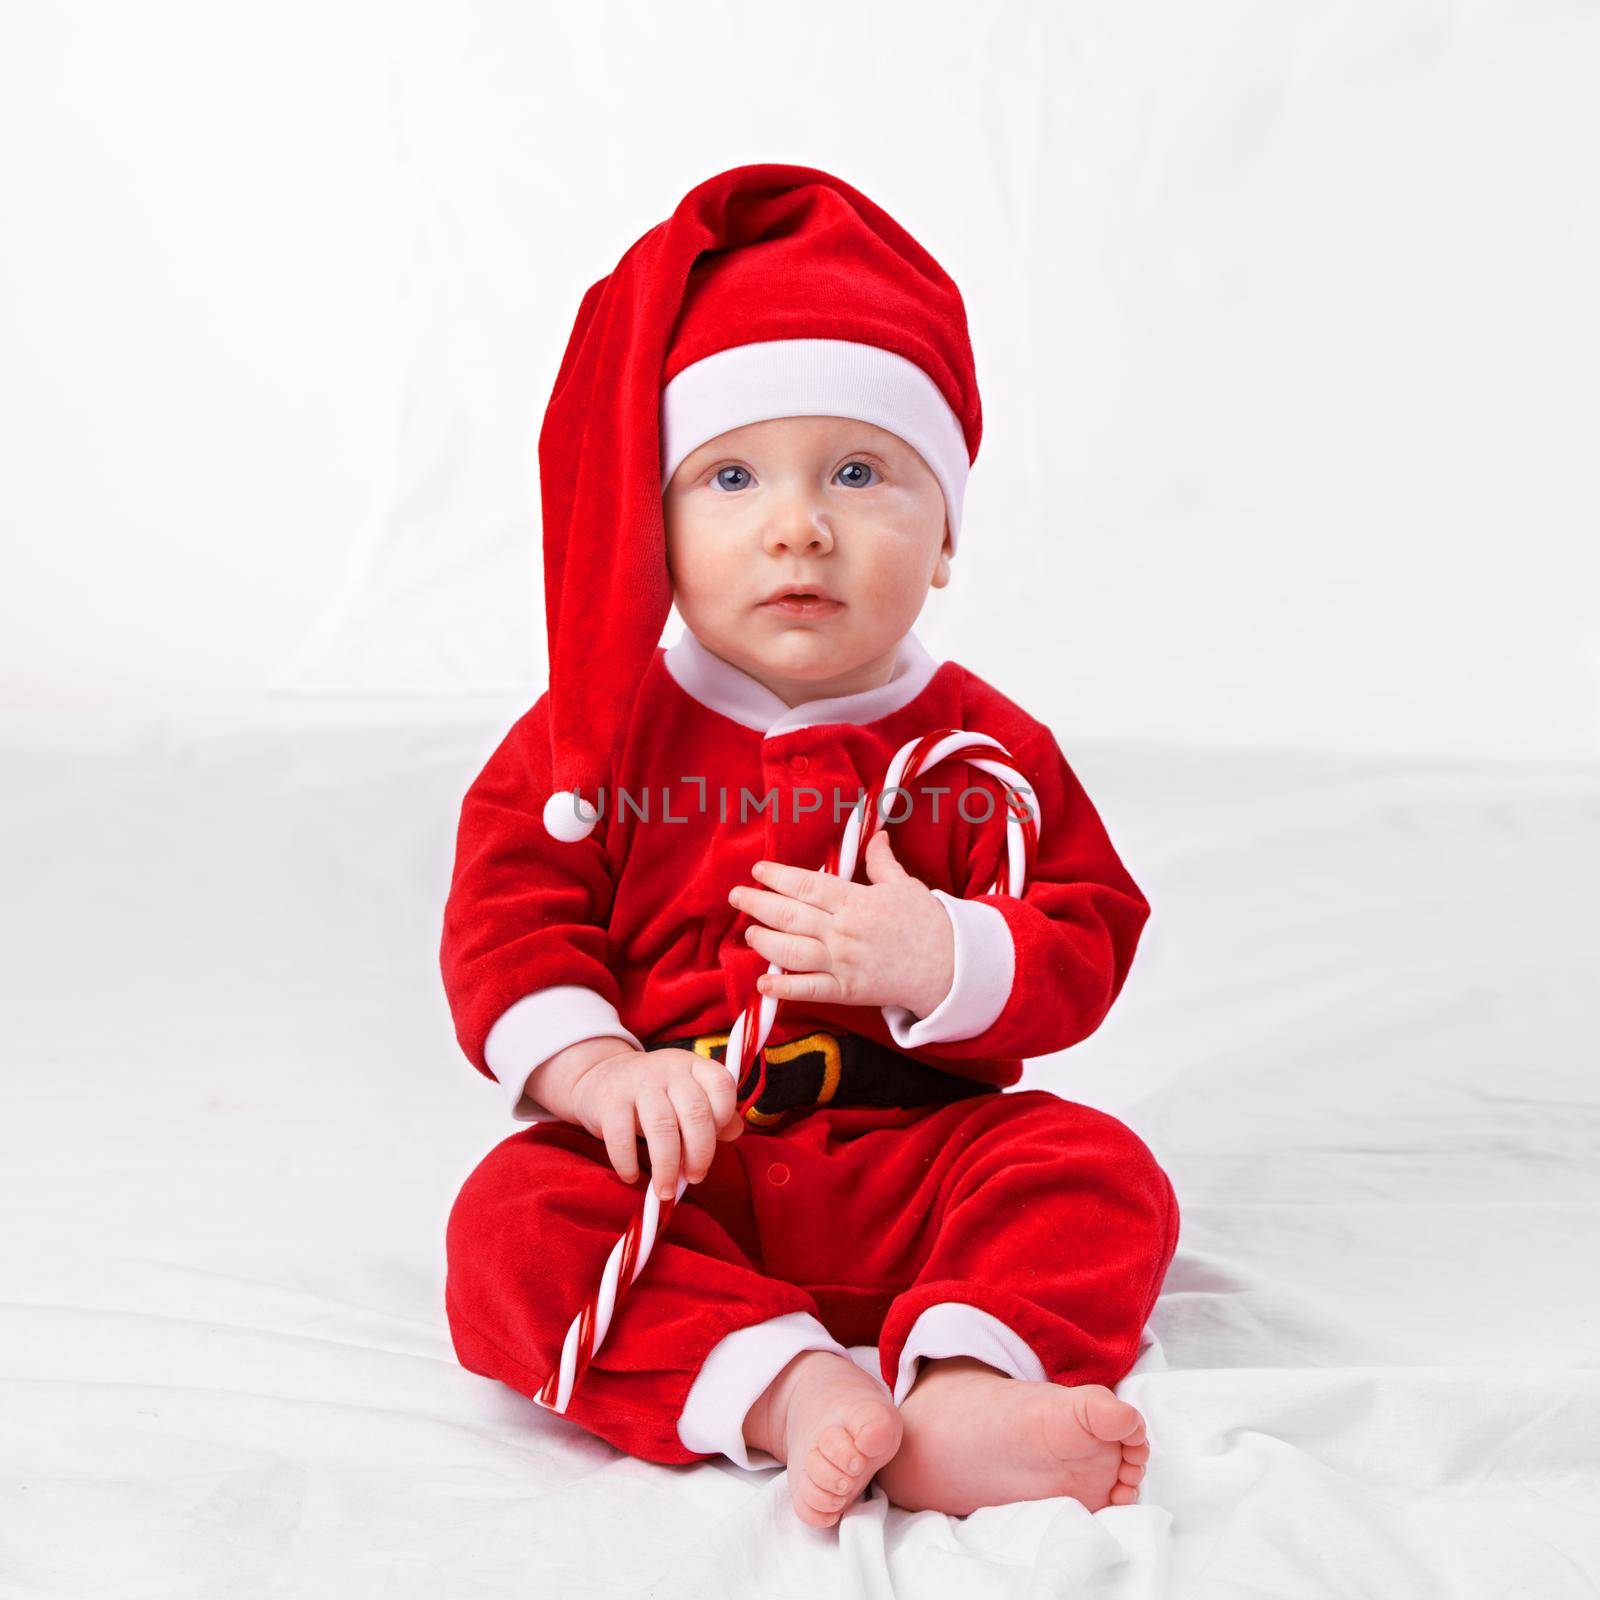 The biggest gift of all. Studio shot of a little boy dressed up in a santa costume